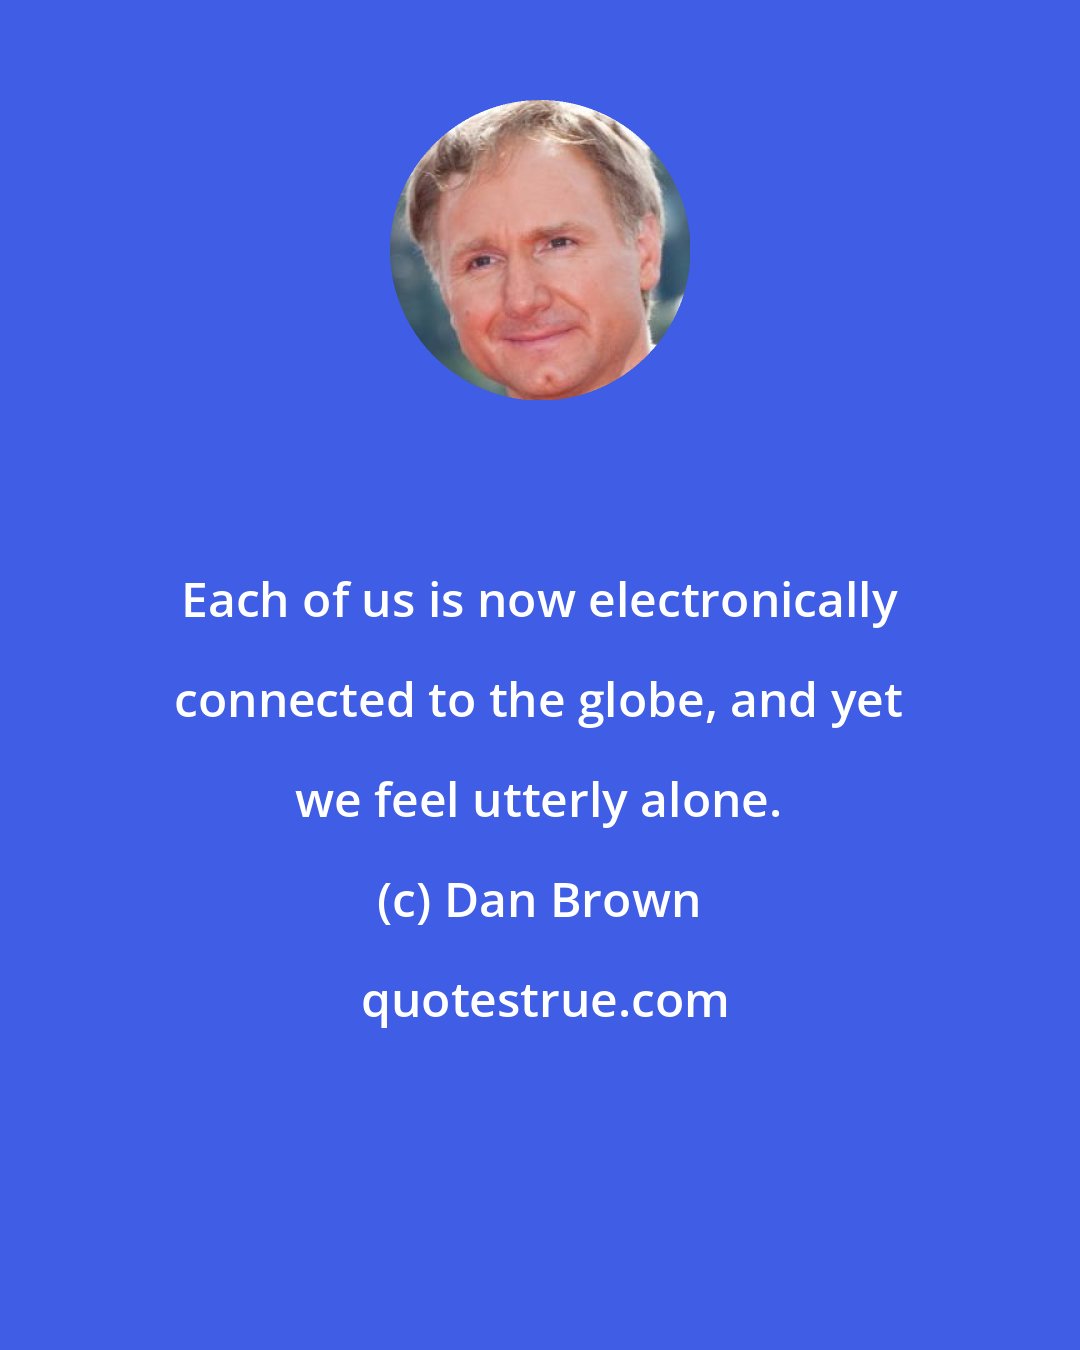 Dan Brown: Each of us is now electronically connected to the globe, and yet we feel utterly alone.